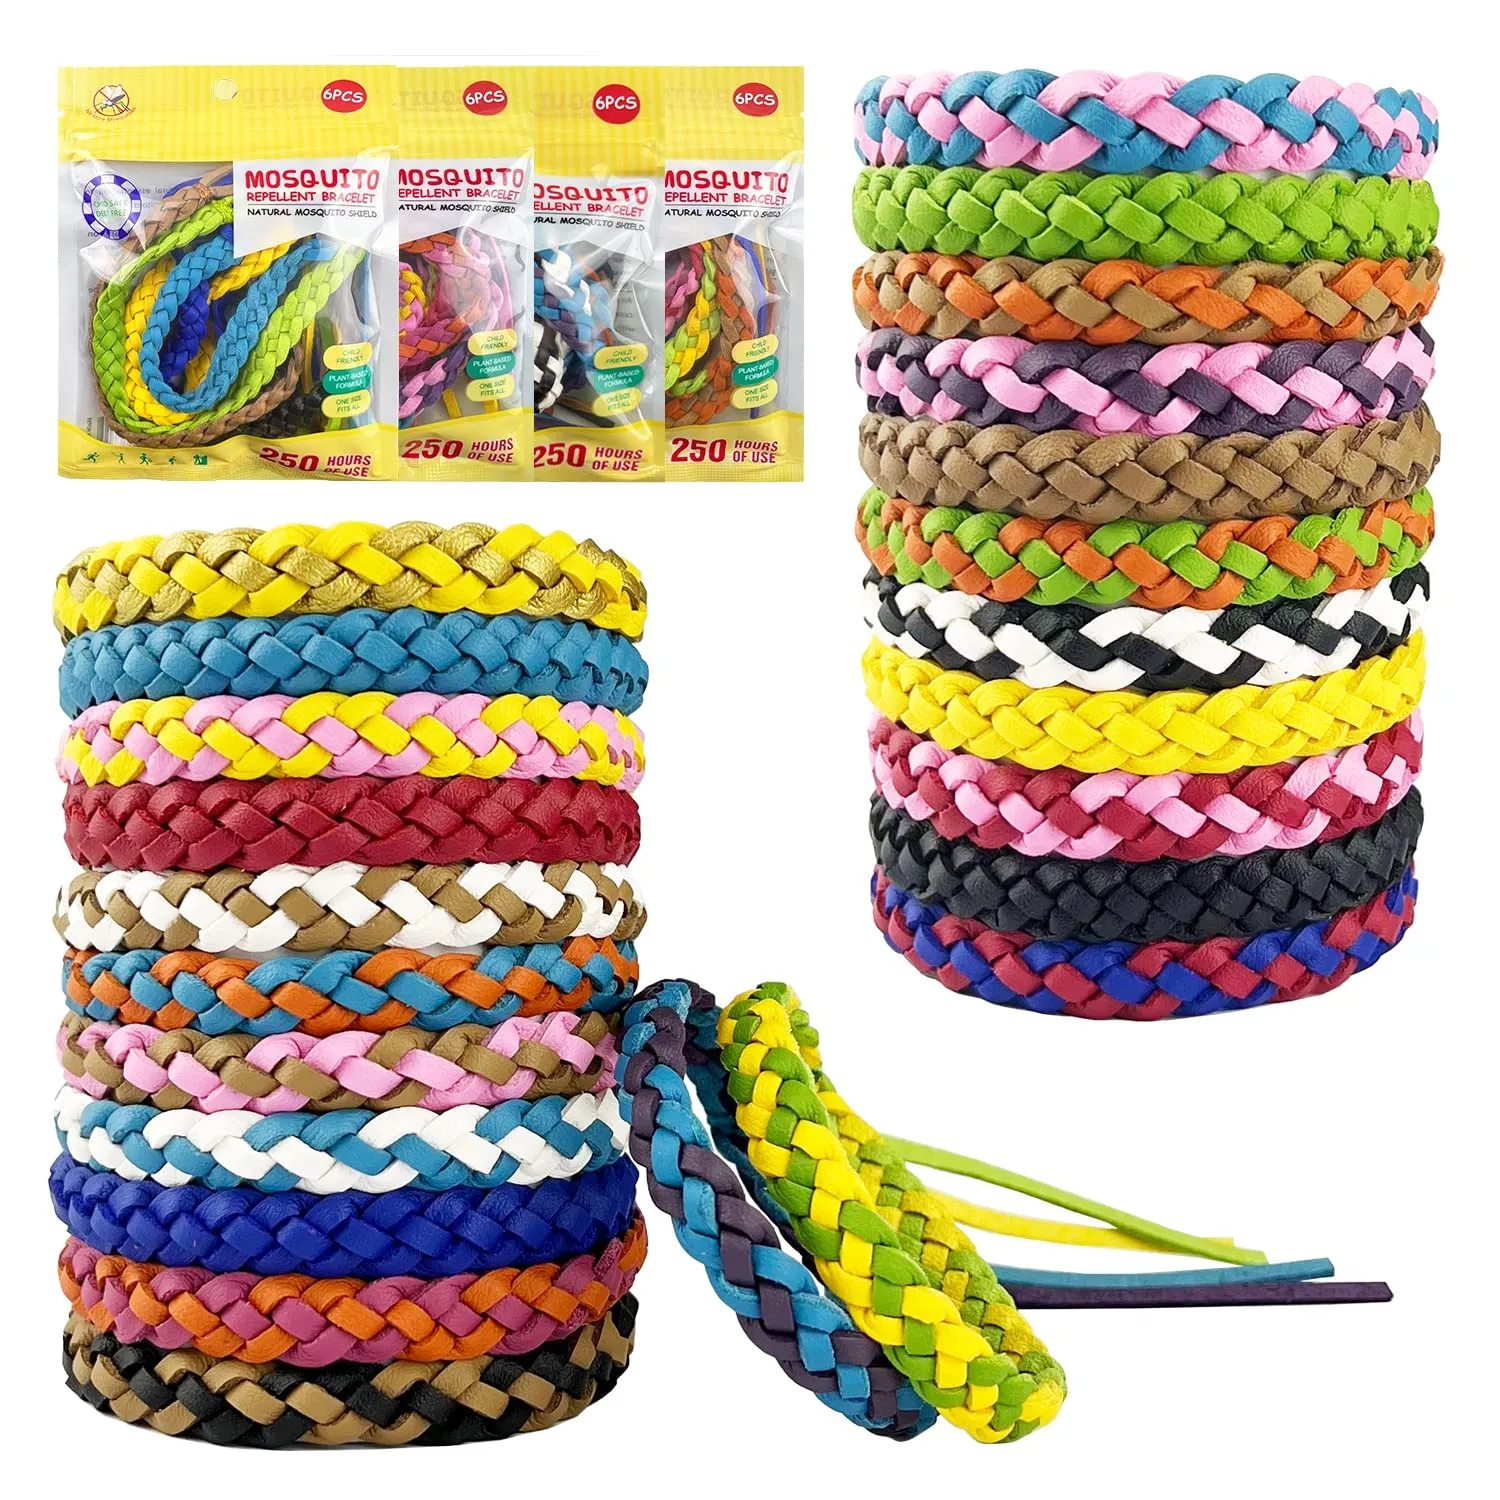 FeelGlad 12 Pack Mosquito Repellent Bracelets, 100% Natural | Bug and  Insect Protection, Waterproof DEET-Free Band | Pest Control for Kids and  Adults - Walmart.com